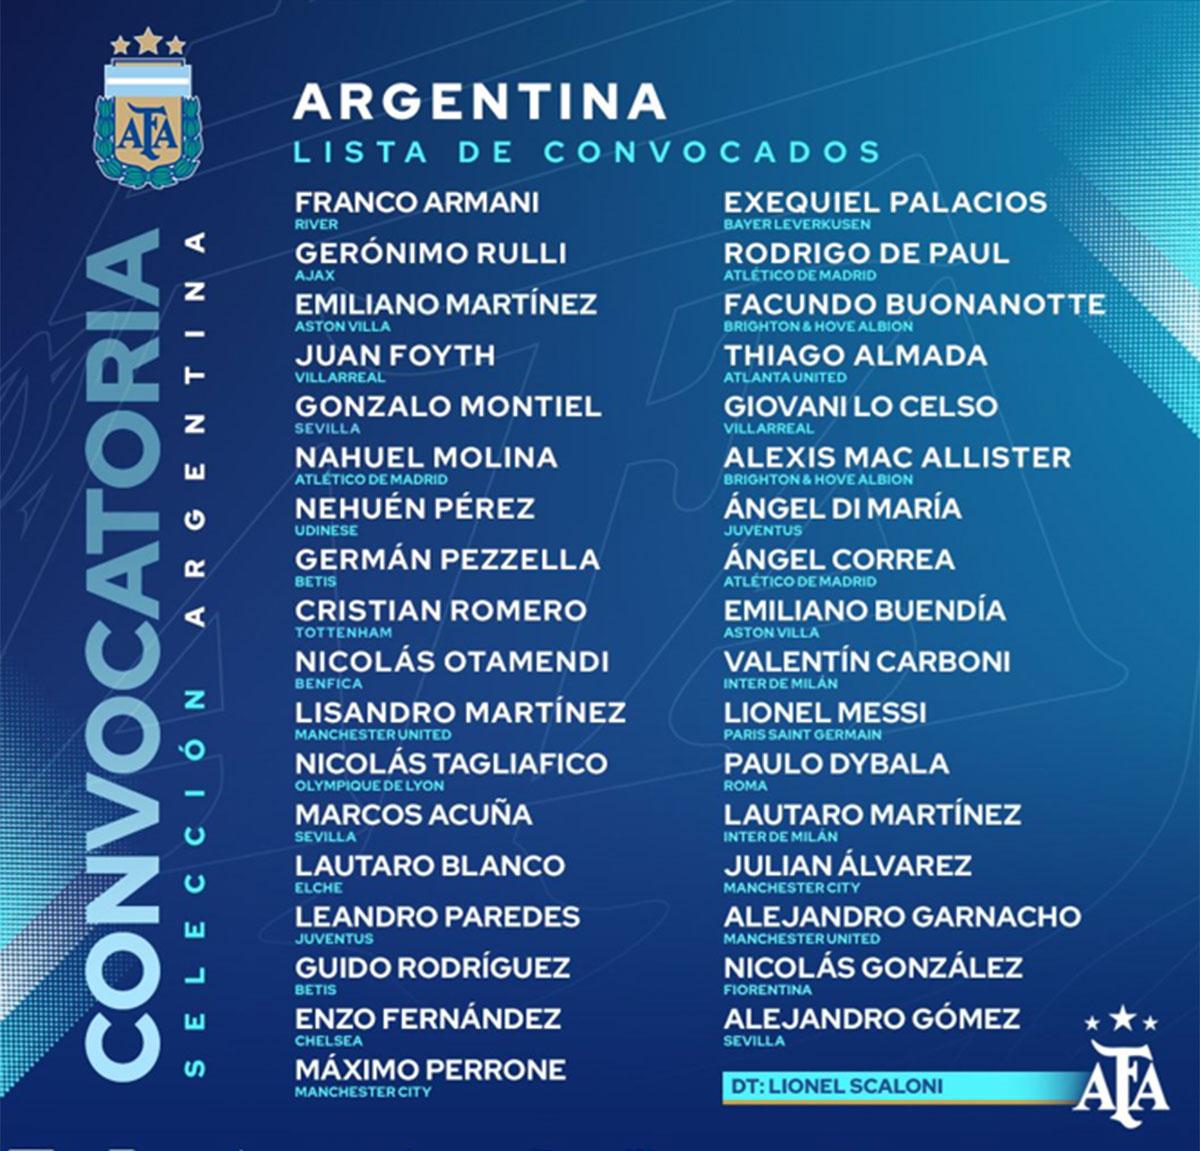 With the world champions and some surprises, Scaloni confirmed those called up to play in Santiago